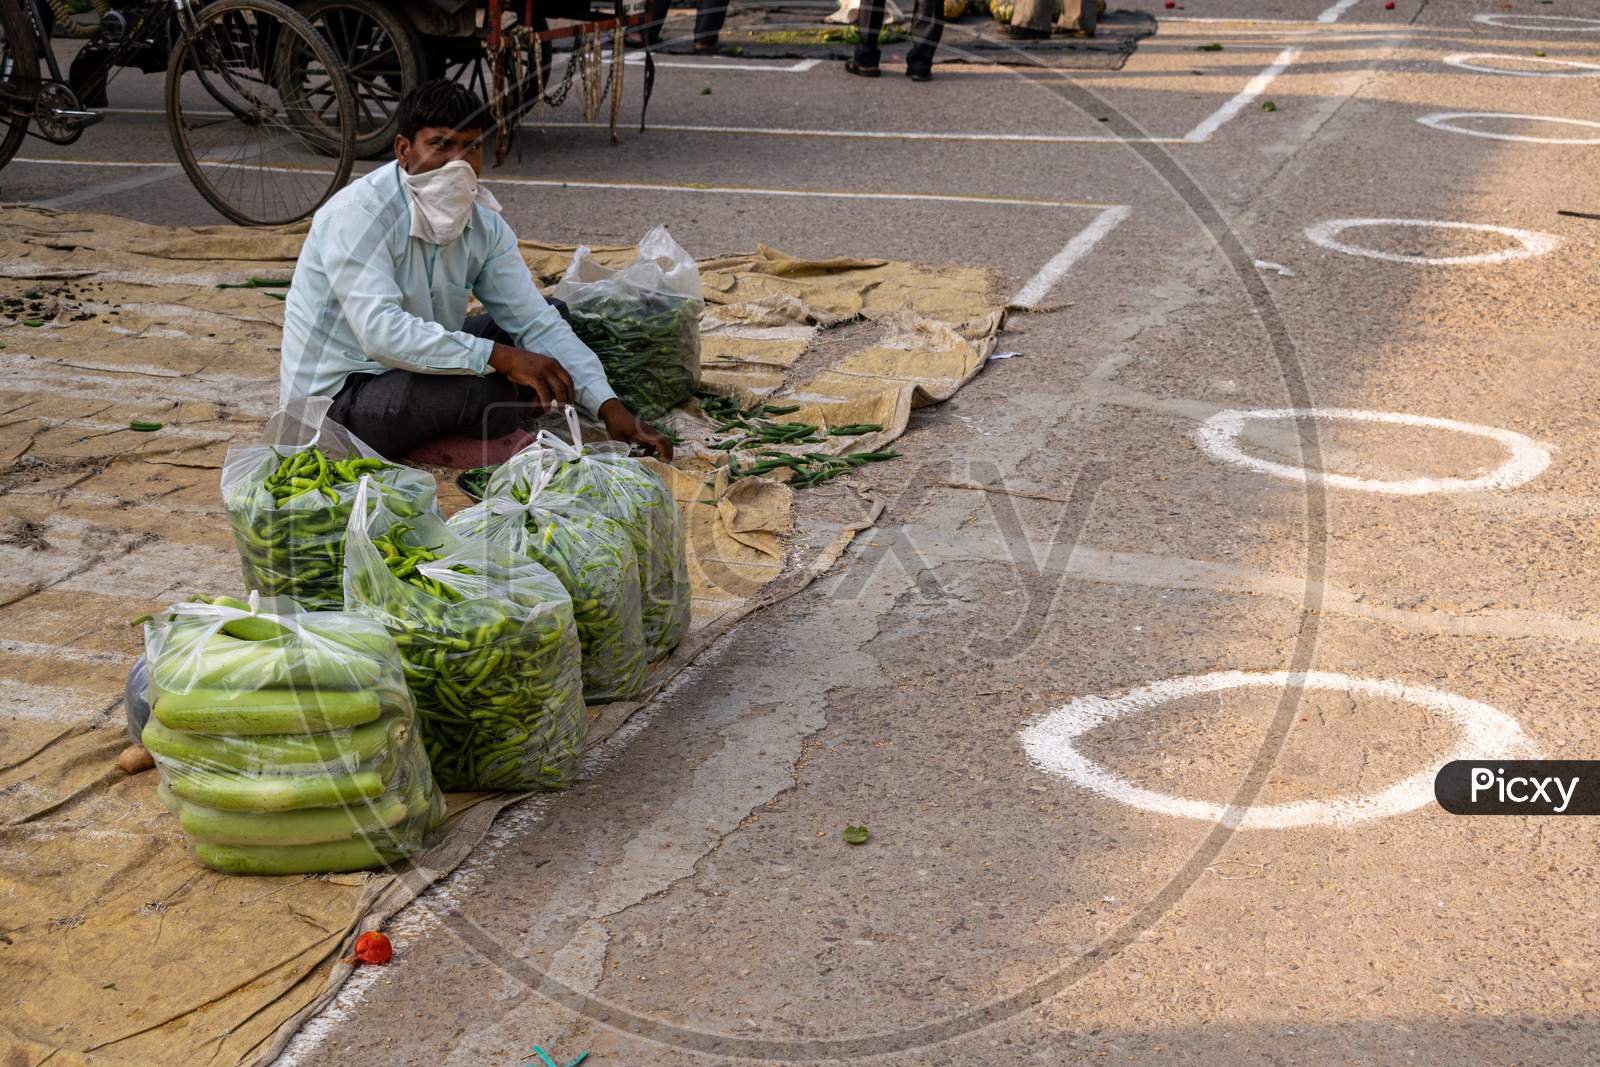 Vegetable sellers selling vegetables at Sabzi Mandi or vegetable market after partial exemption from lockdown and circles made on the ground for social distancing amid Coronavirus or Covid-19 outbreak in India